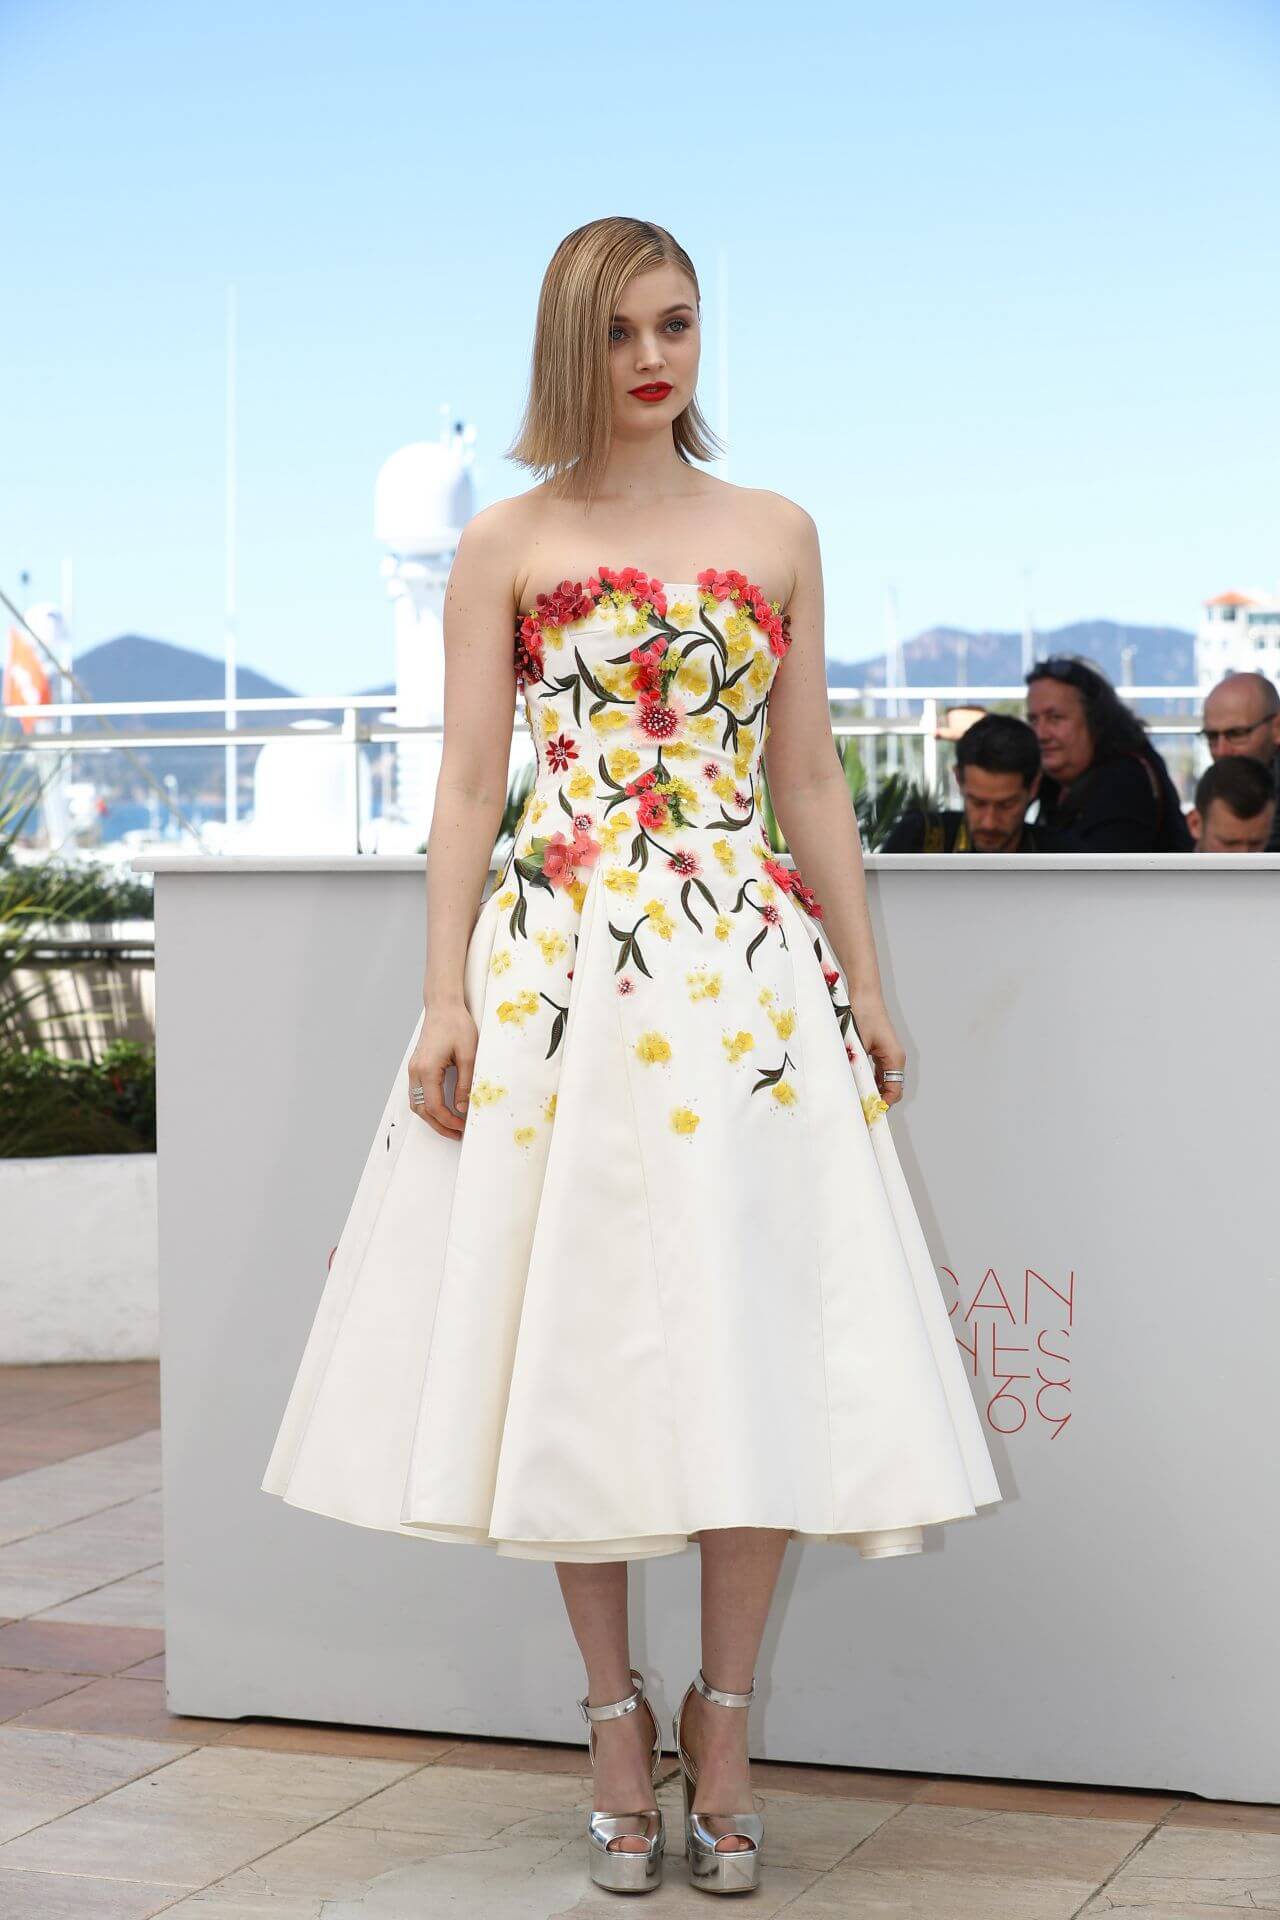 Bella Heathcote In Off White With Floral Design Strapless Gown Dress